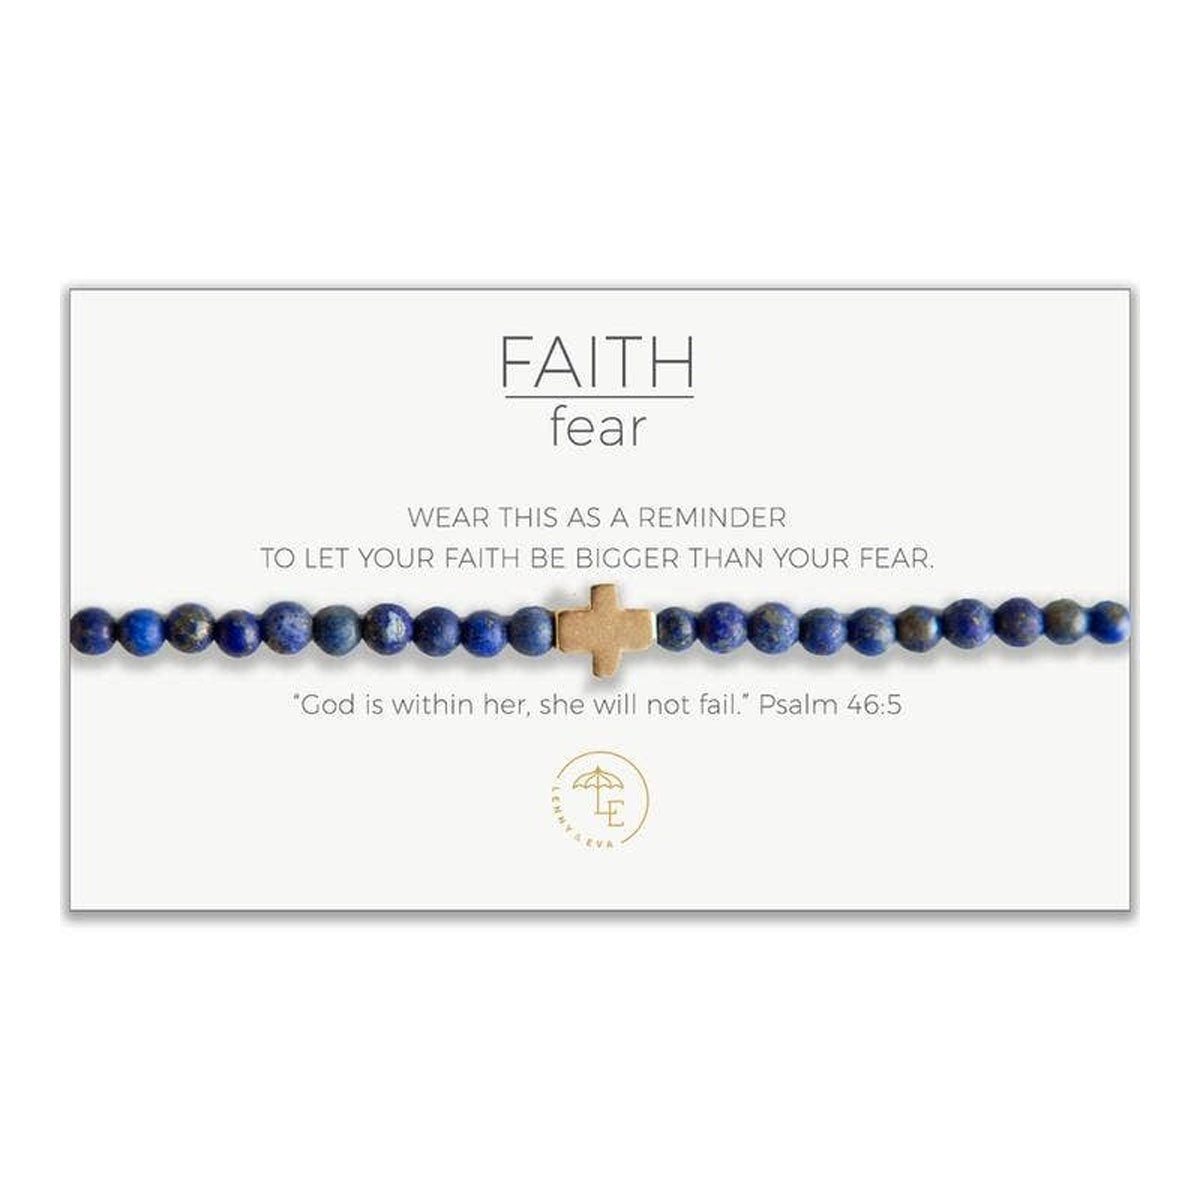 Blue lapiz lazuli beaded stretch bracelet with gold cross. Card states, "Wear this as a reminder to let your faith be bigger than your fear." and "God is within her, she will not fail." Psalm 46:5